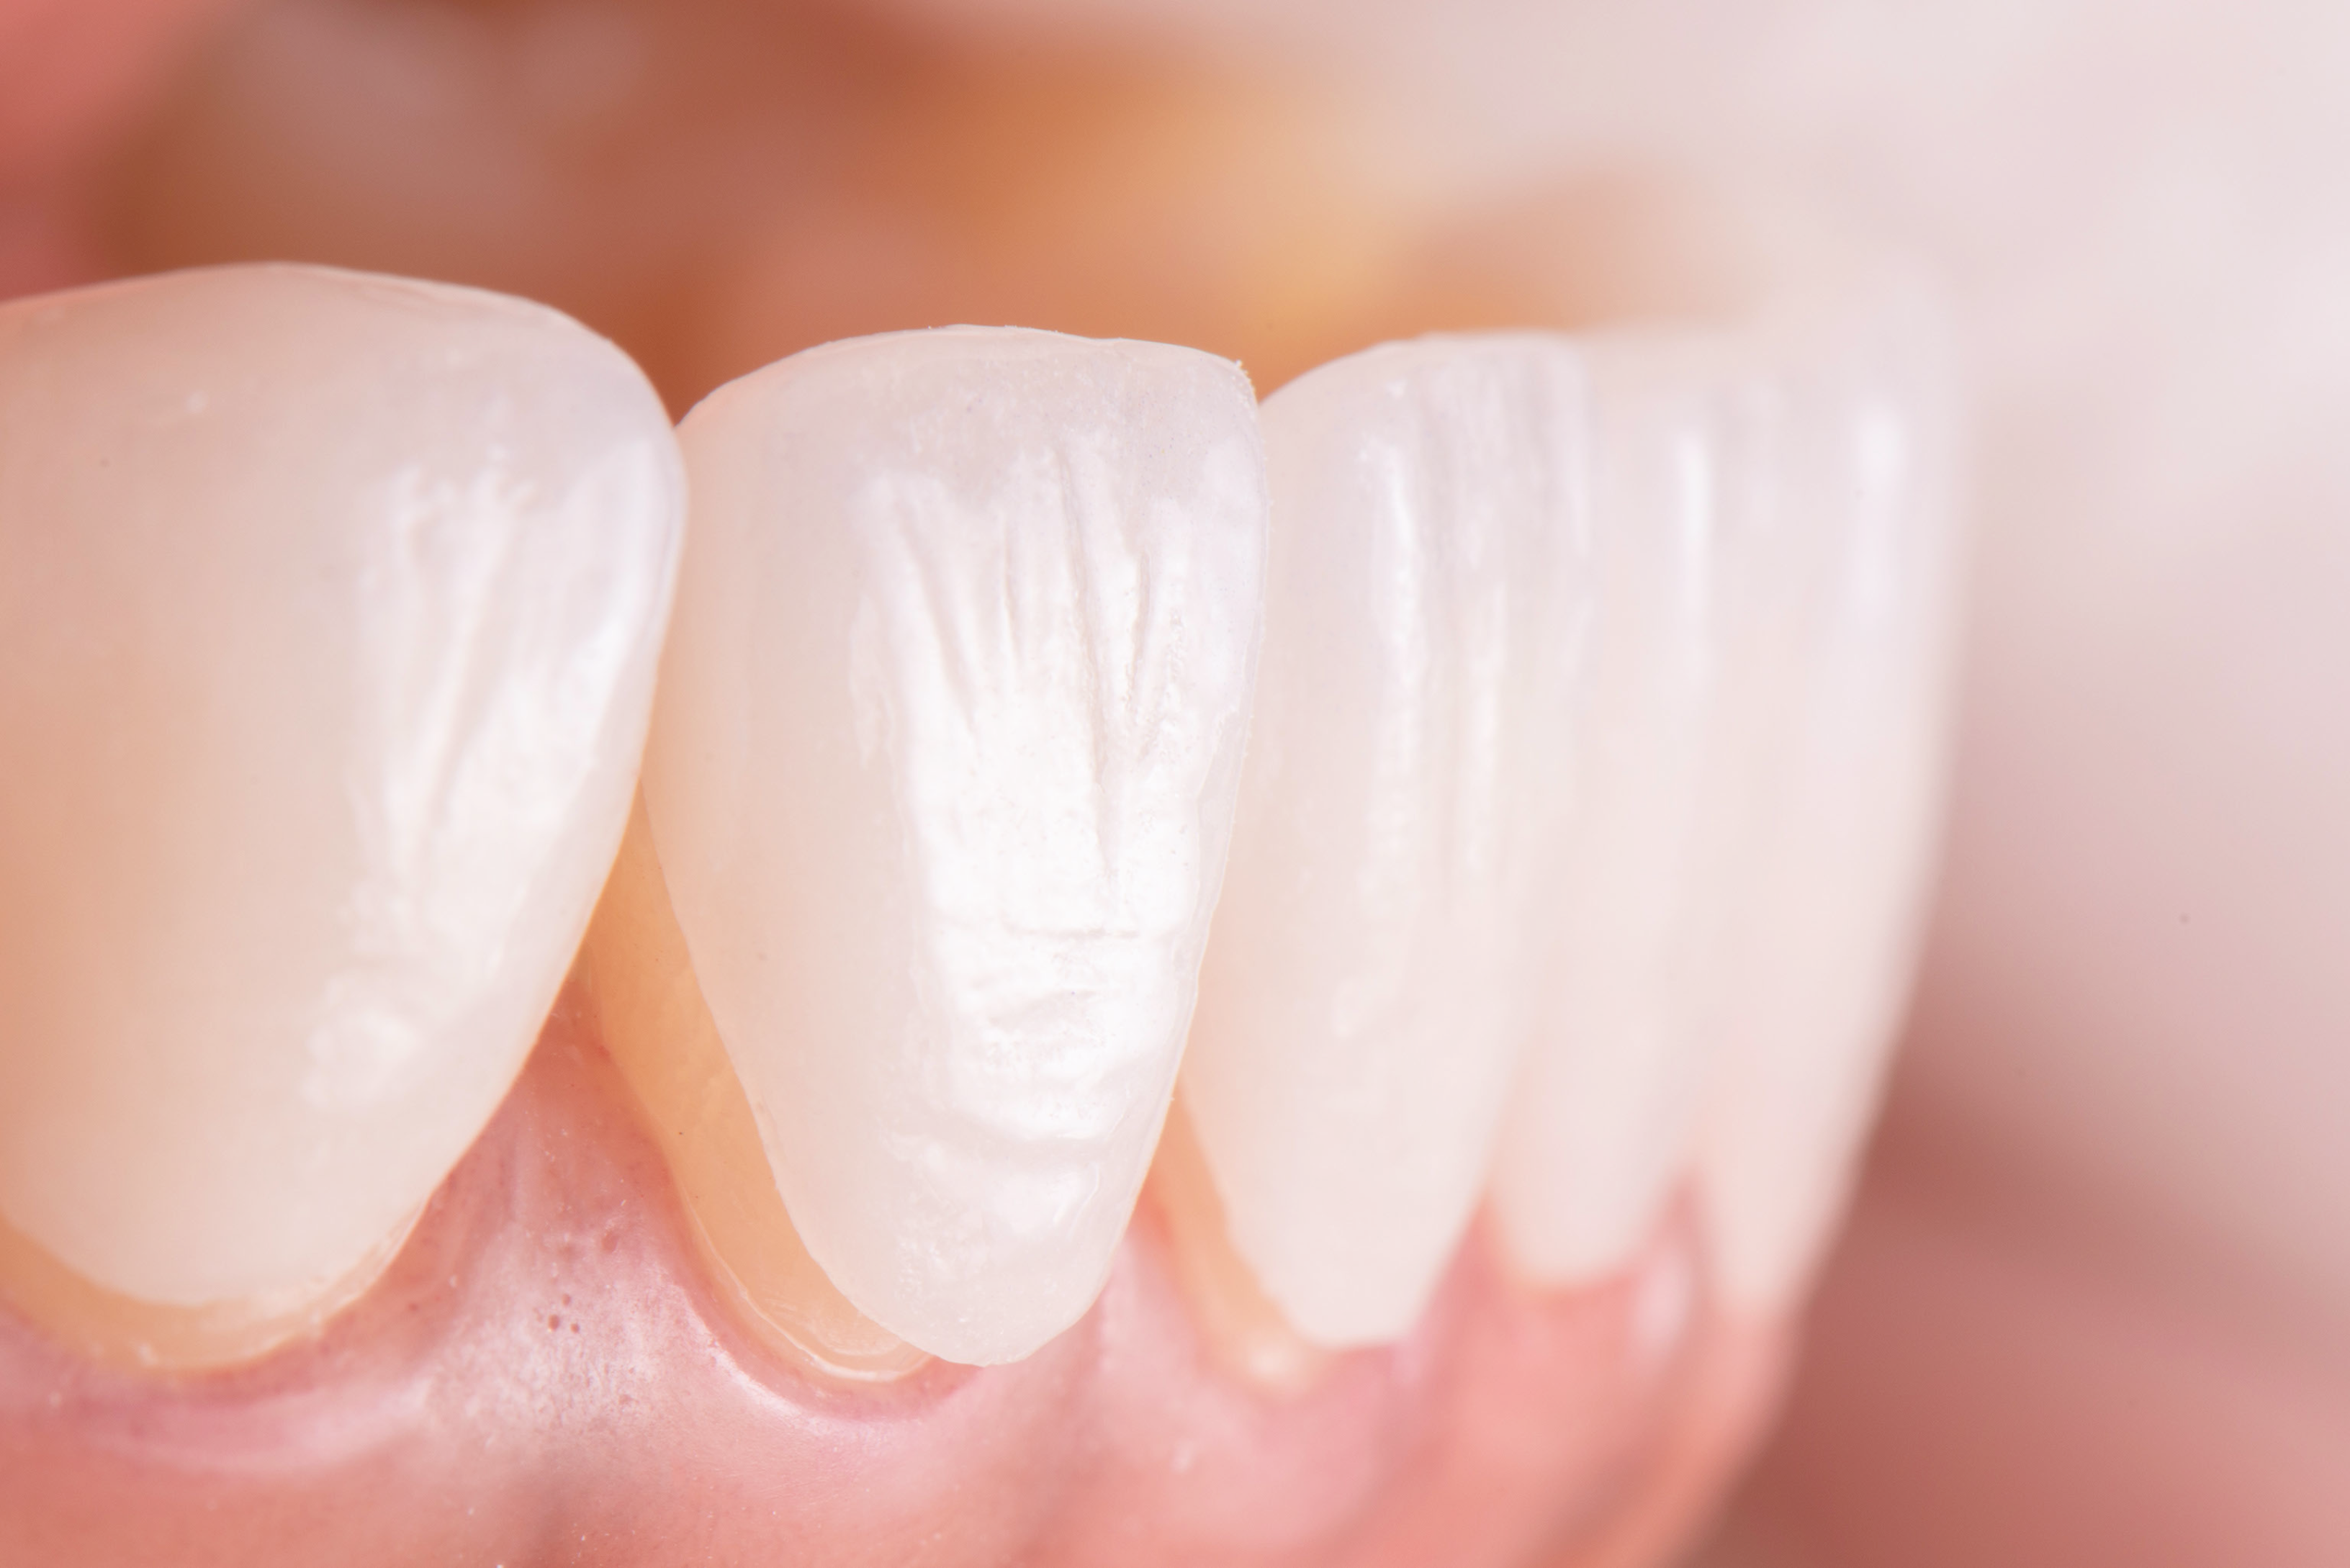 Veneers: A Solution to Chipped and Discolored Teeth?